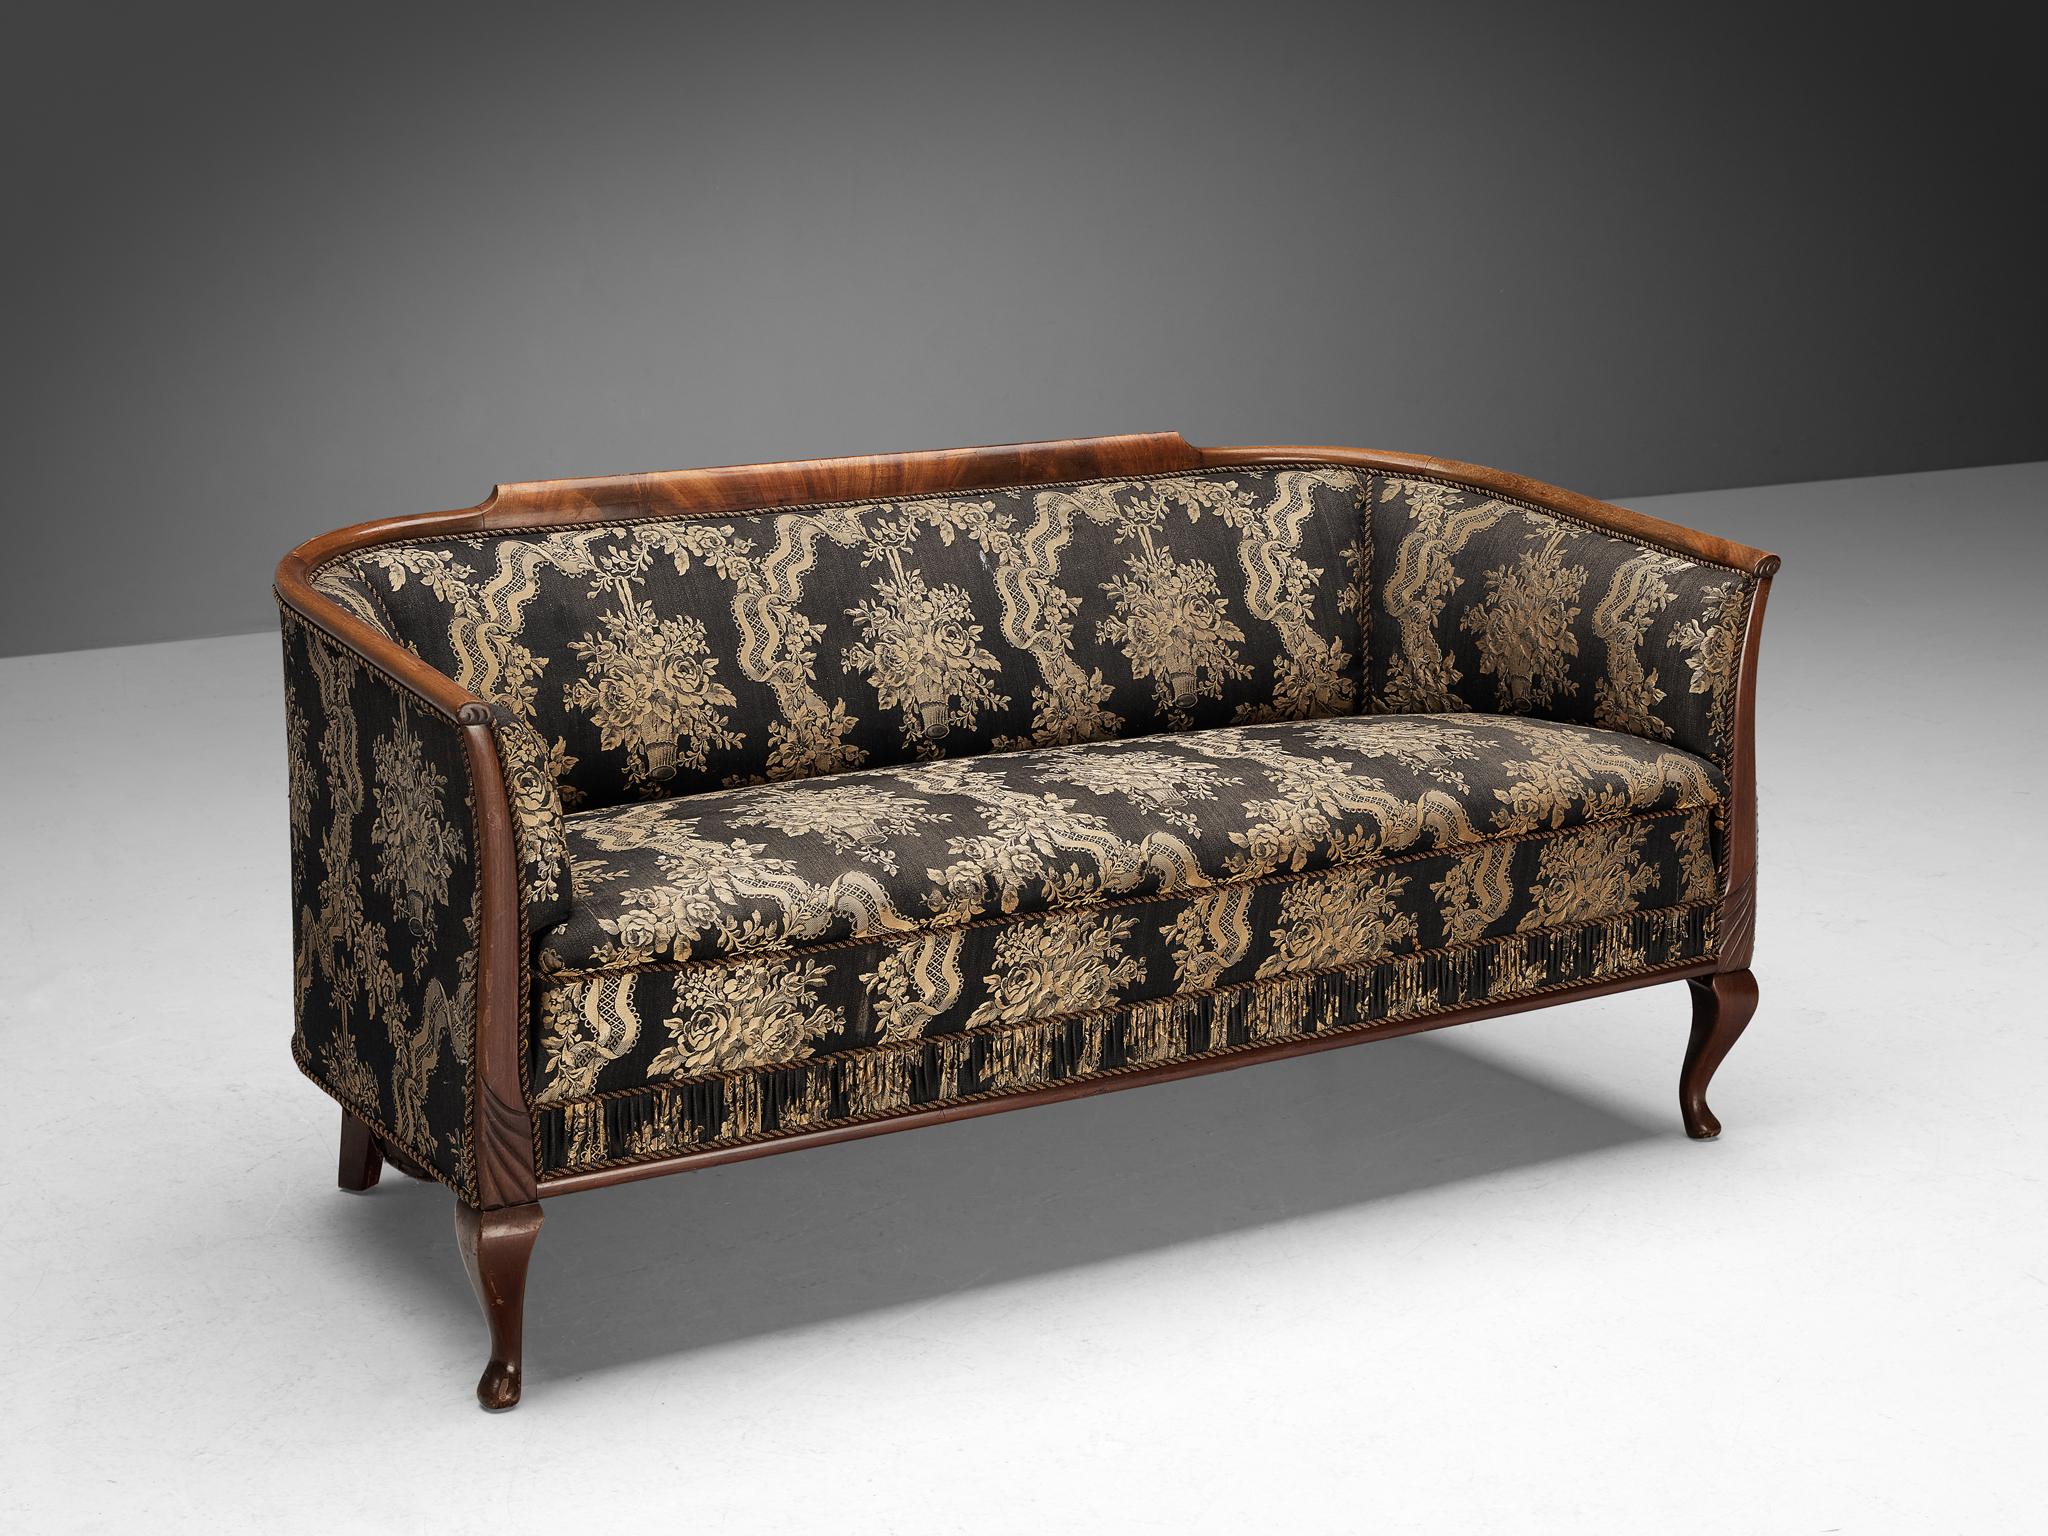 Sofa or settee, fabric, stained beech, walnut, Denmark, 1940s.

This settee owes its elegancy to the way the corpus is built: a thin frame that rests on beautifully sculpted legs that allude to the stylistics traits of the artistic Art Deco